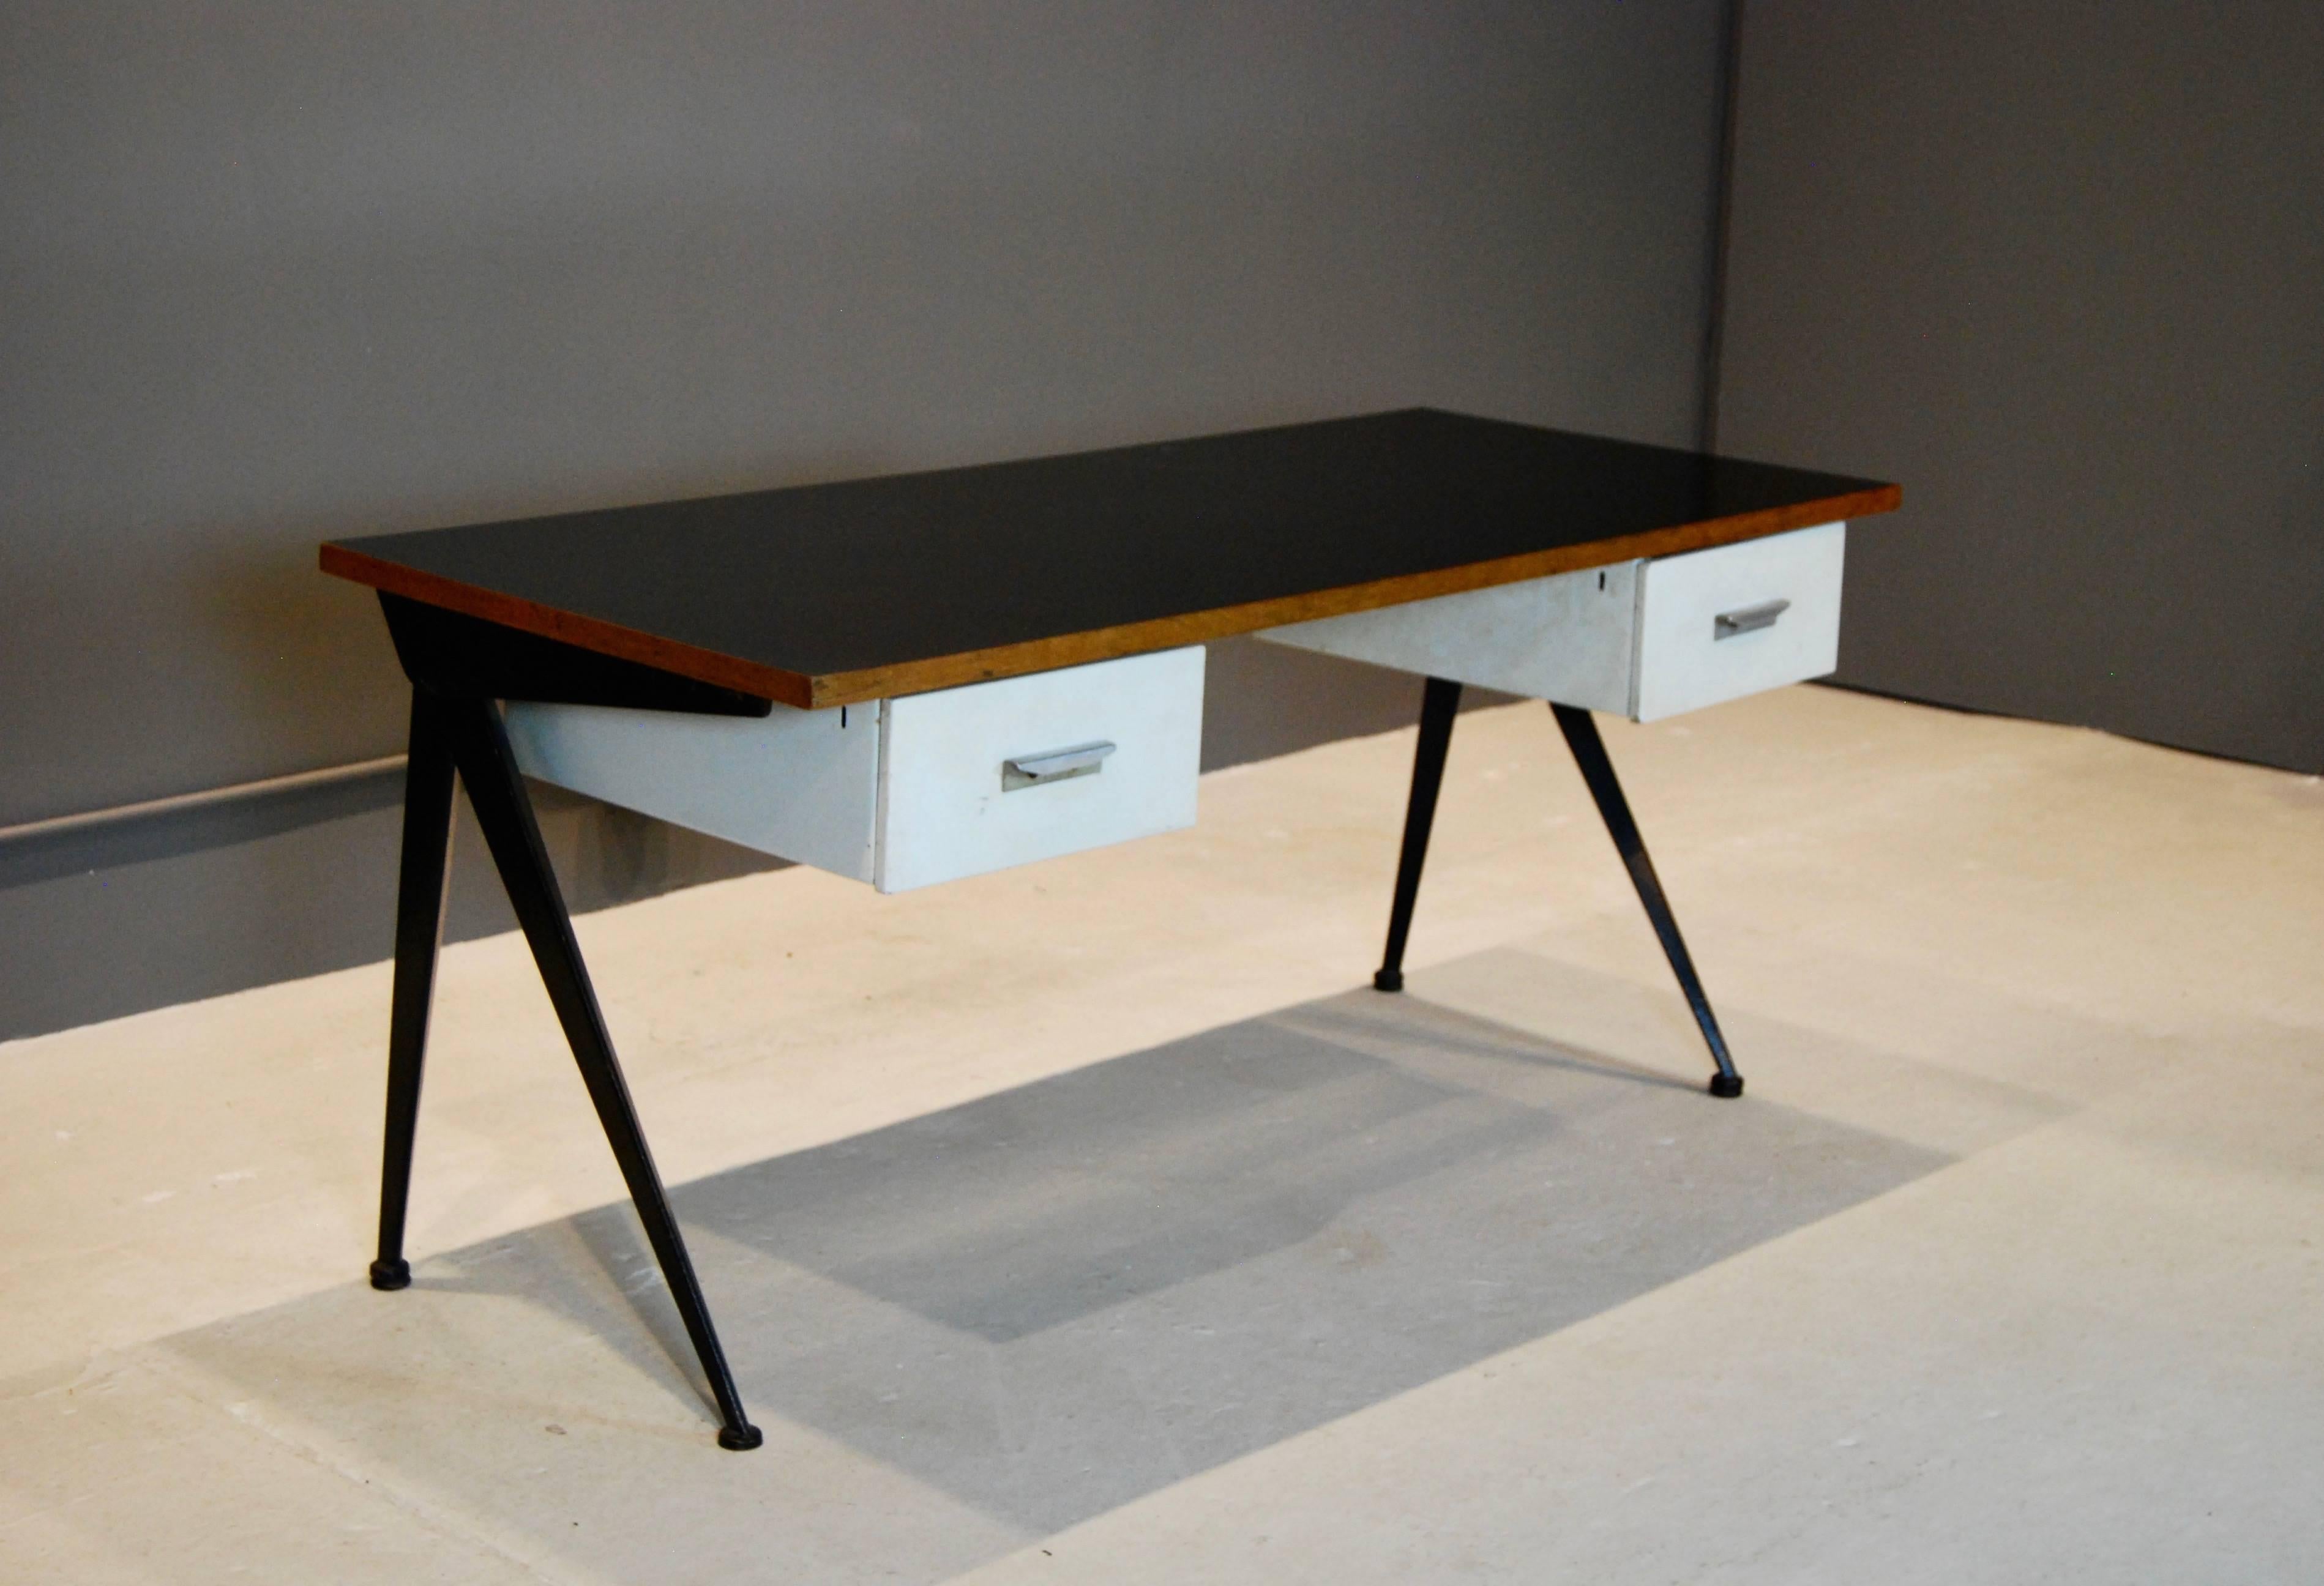 Iconic Compas desk, created by Jean Prouve and manufactured by Atelier Prouve in the 1950s.
Compas- shaped legs support black laminated wood top and two steel drawers.
This desk is in all original condition.
Great style and function.